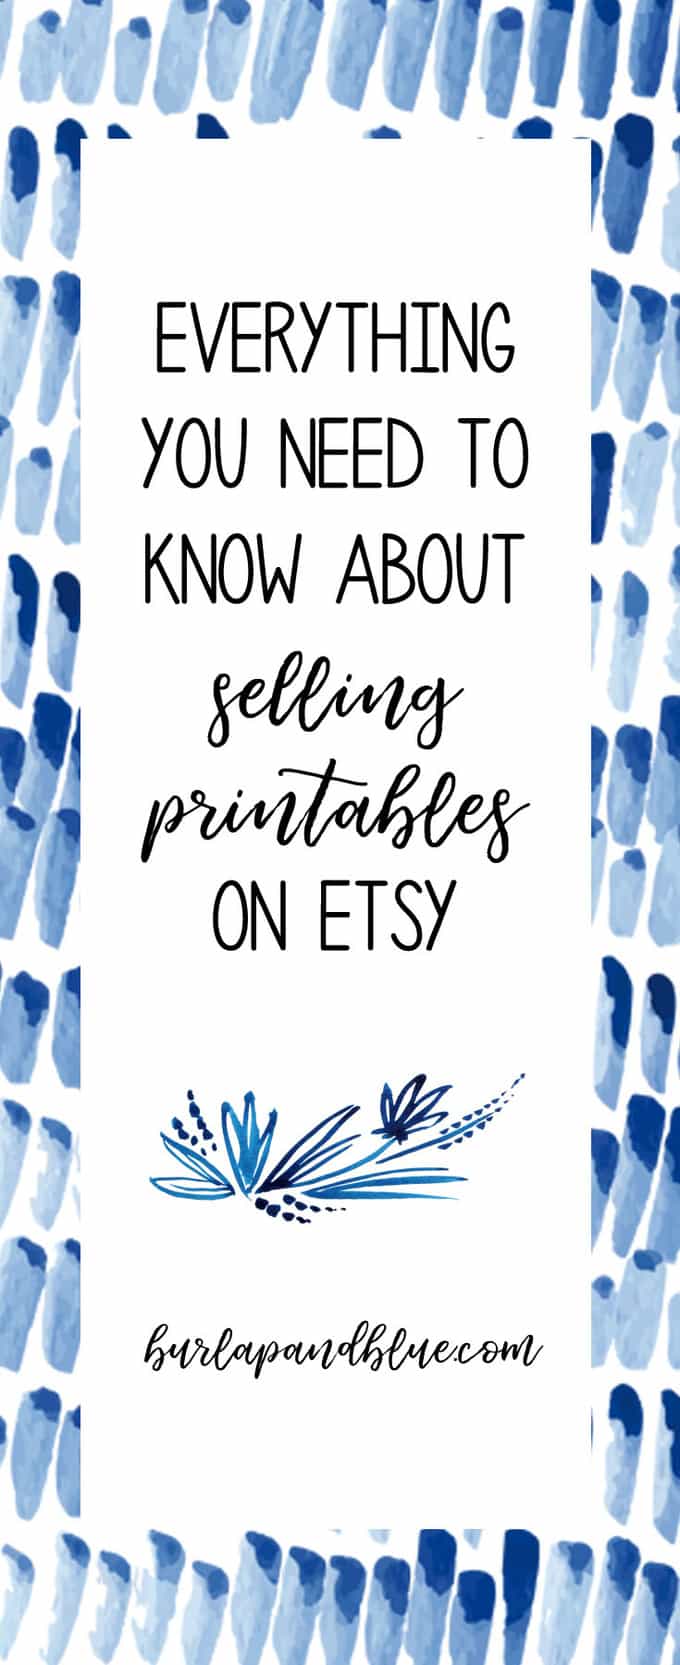 sell-on-etsy-how-to-sell-printables-on-etsy